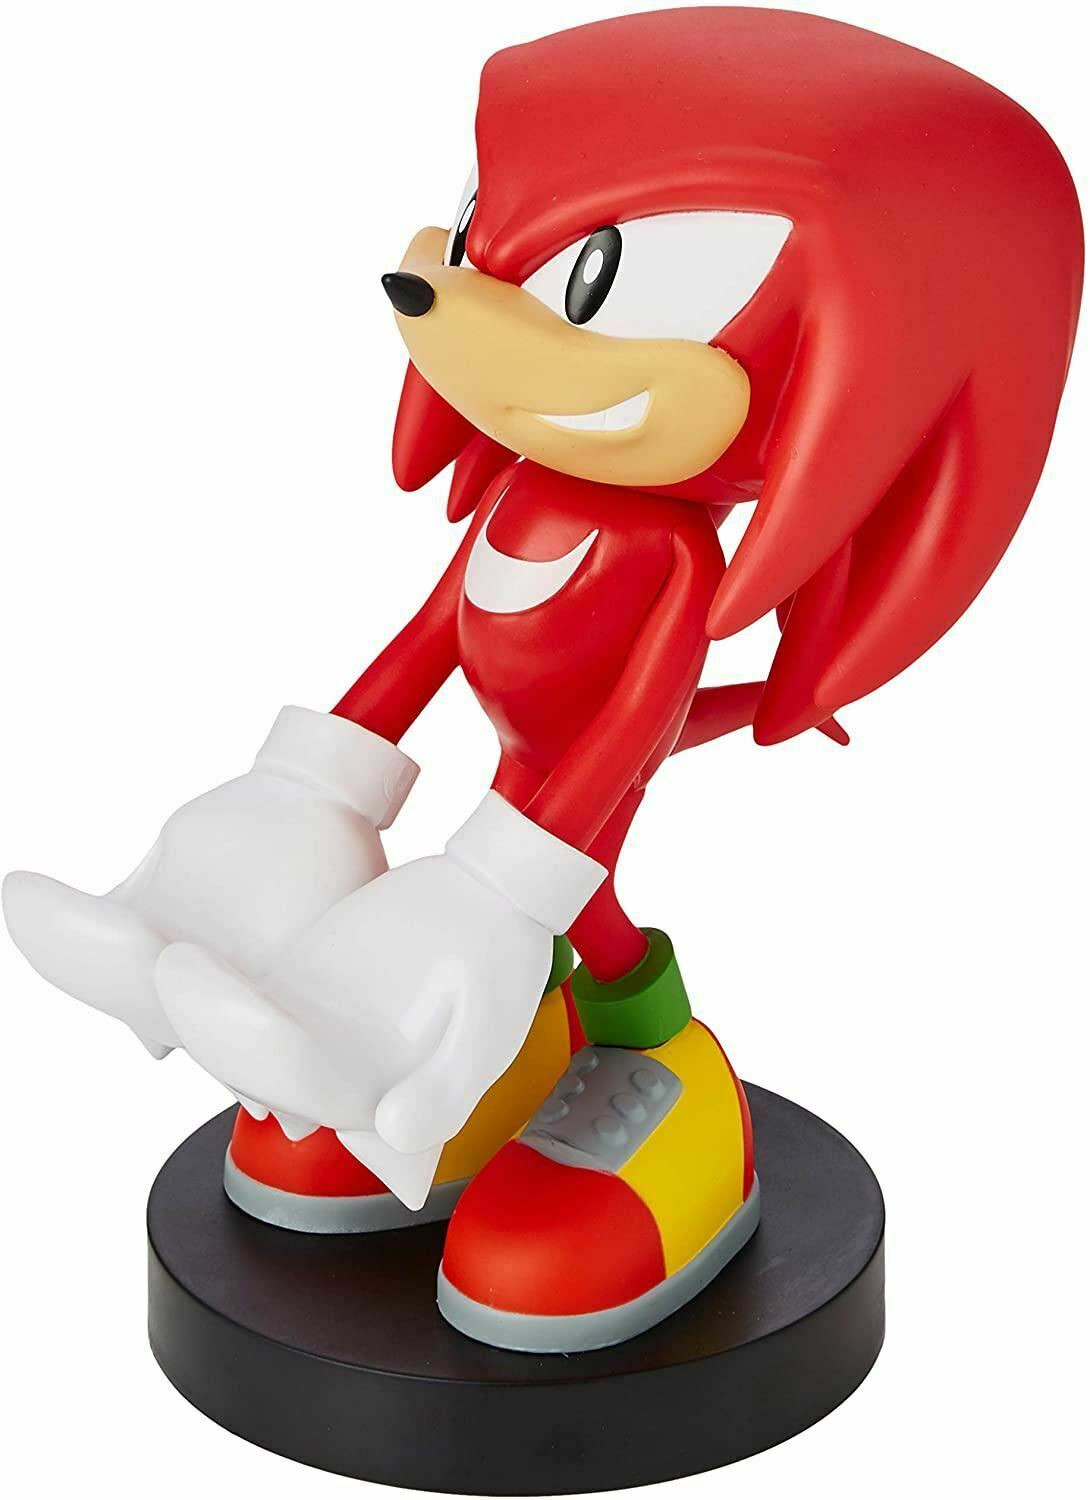 Figurine Support manette Knuckles - Exquisite games - 73990008468 